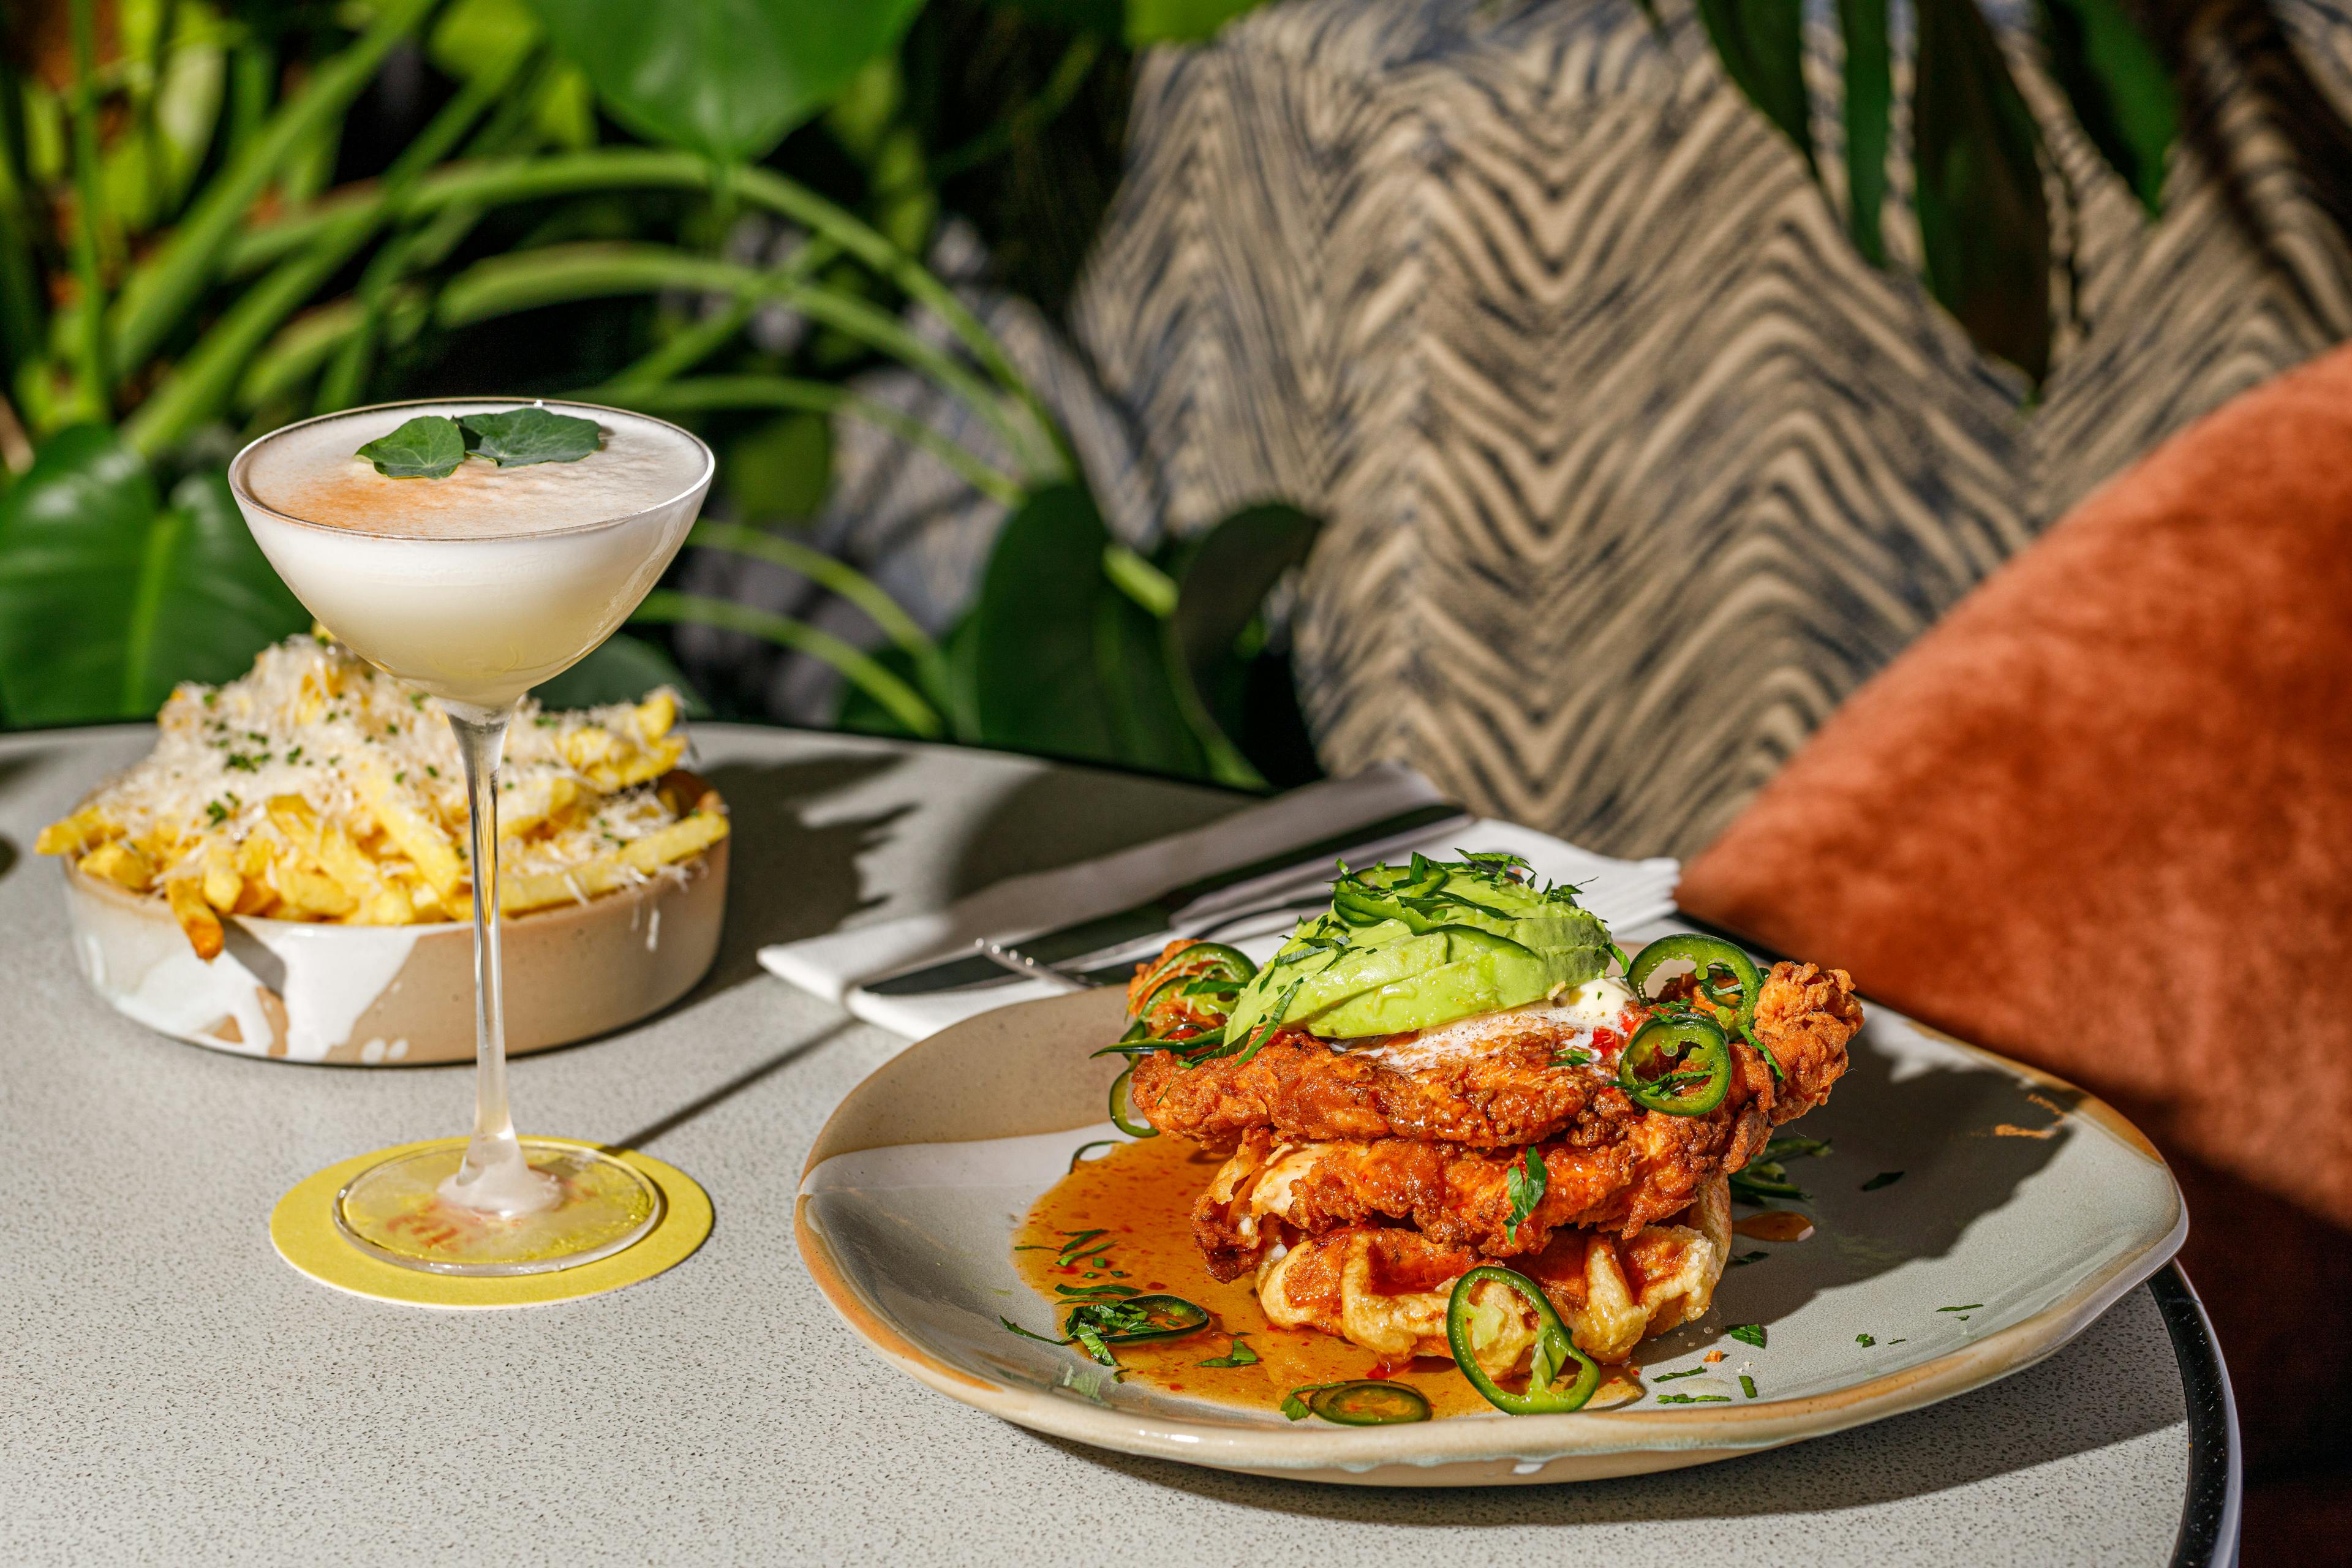 Cocktail beside fried chicken on waffles with cheesy chips behind on an outdoor table with foliage in the background.